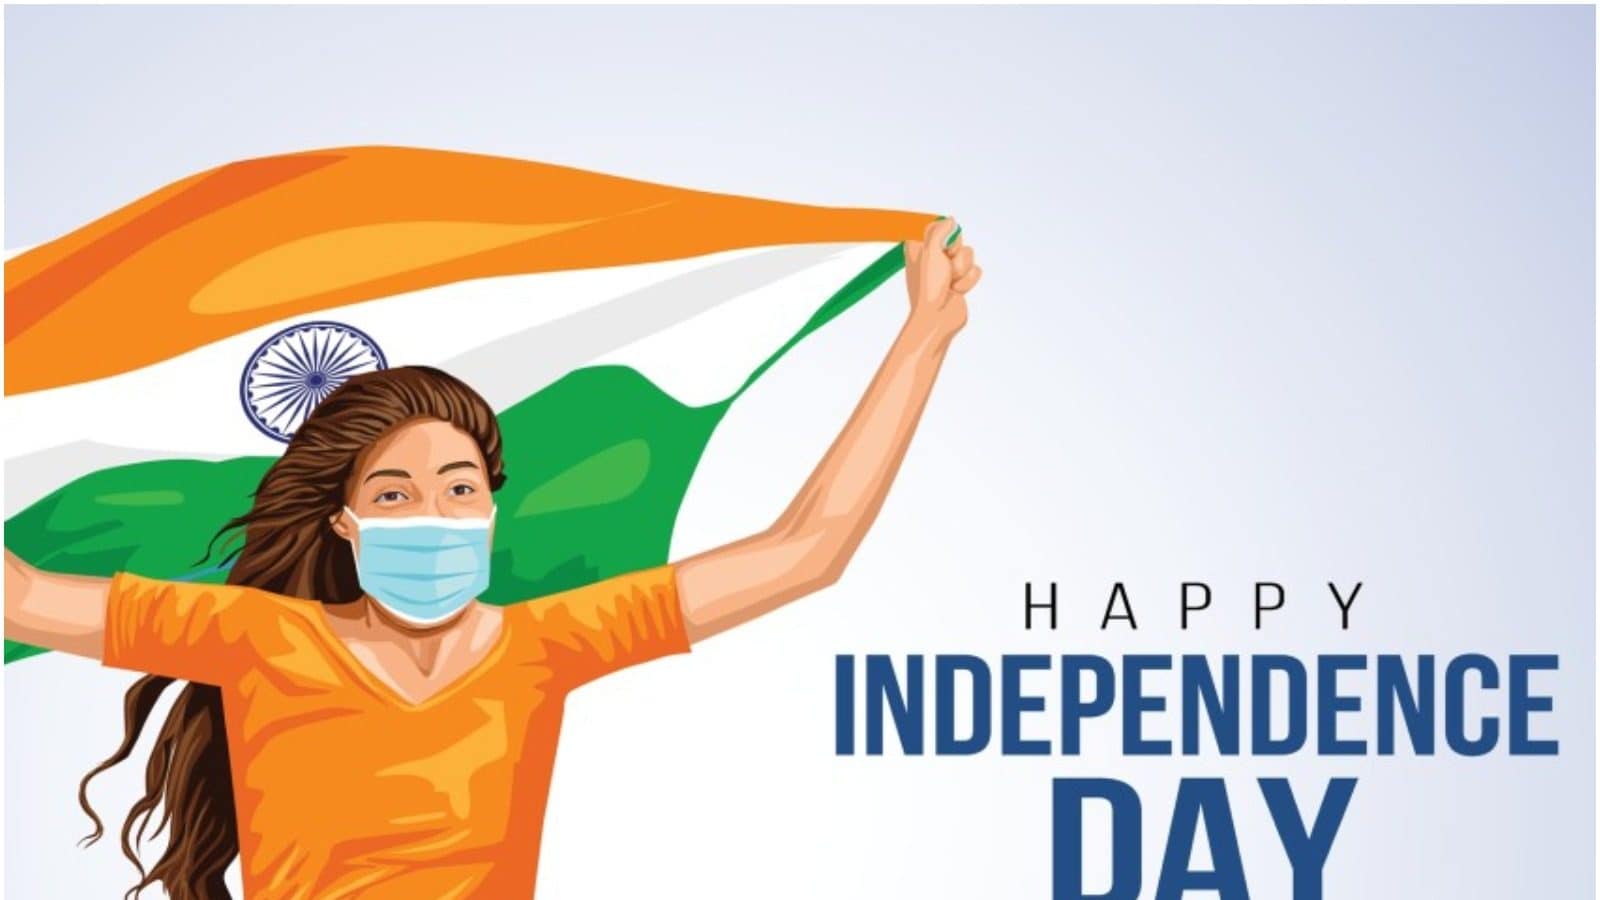 Happy Independence Day 2021: Image, Wishes, Quotes, Messages and WhatsApp Greetings to Share